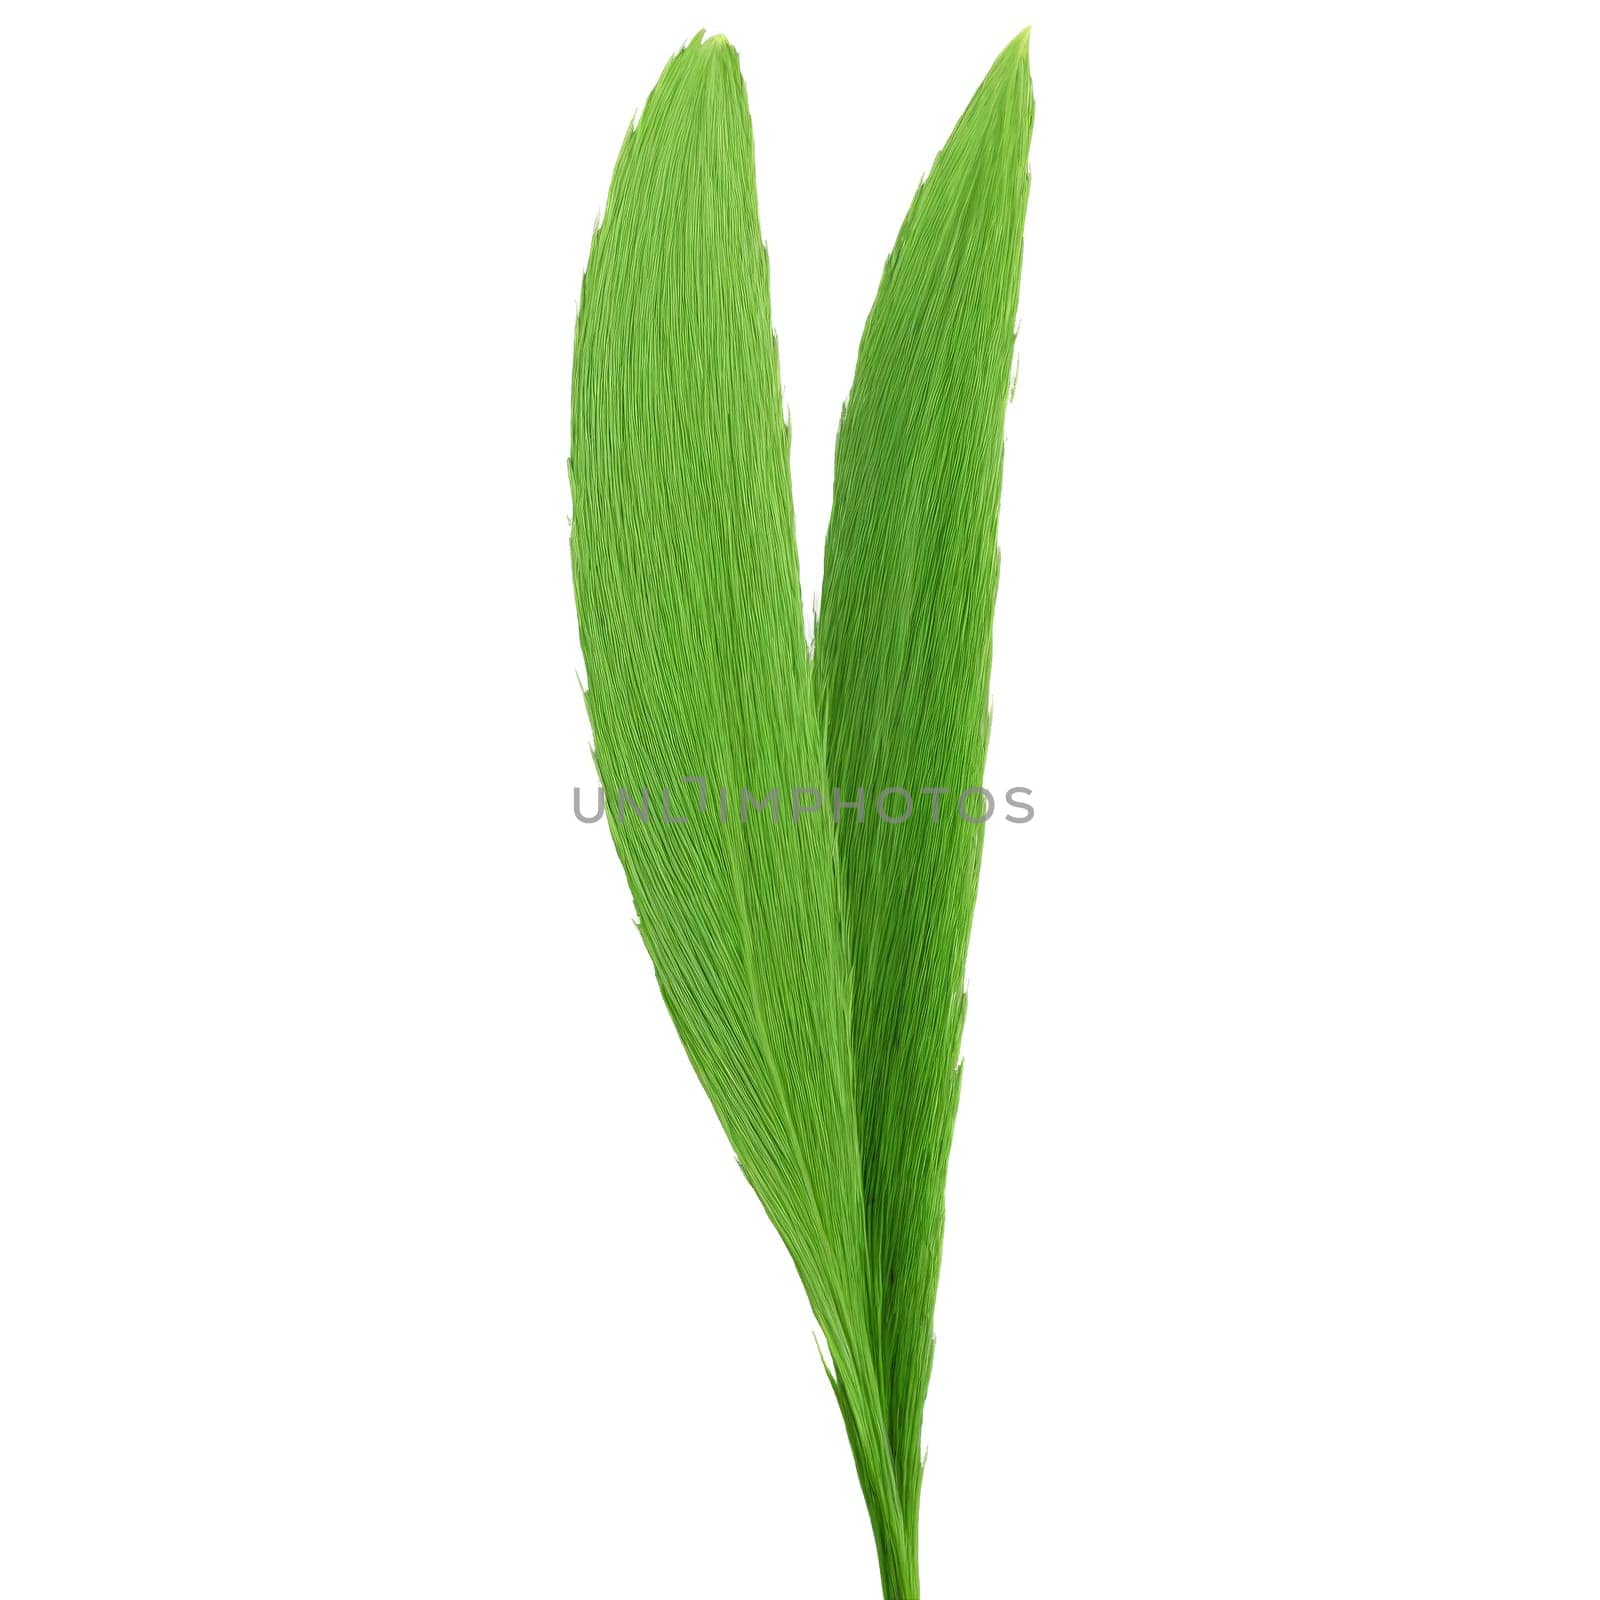 Grass Blade long green leaf with parallel veins and a slightly wavy texture swaying gently by panophotograph